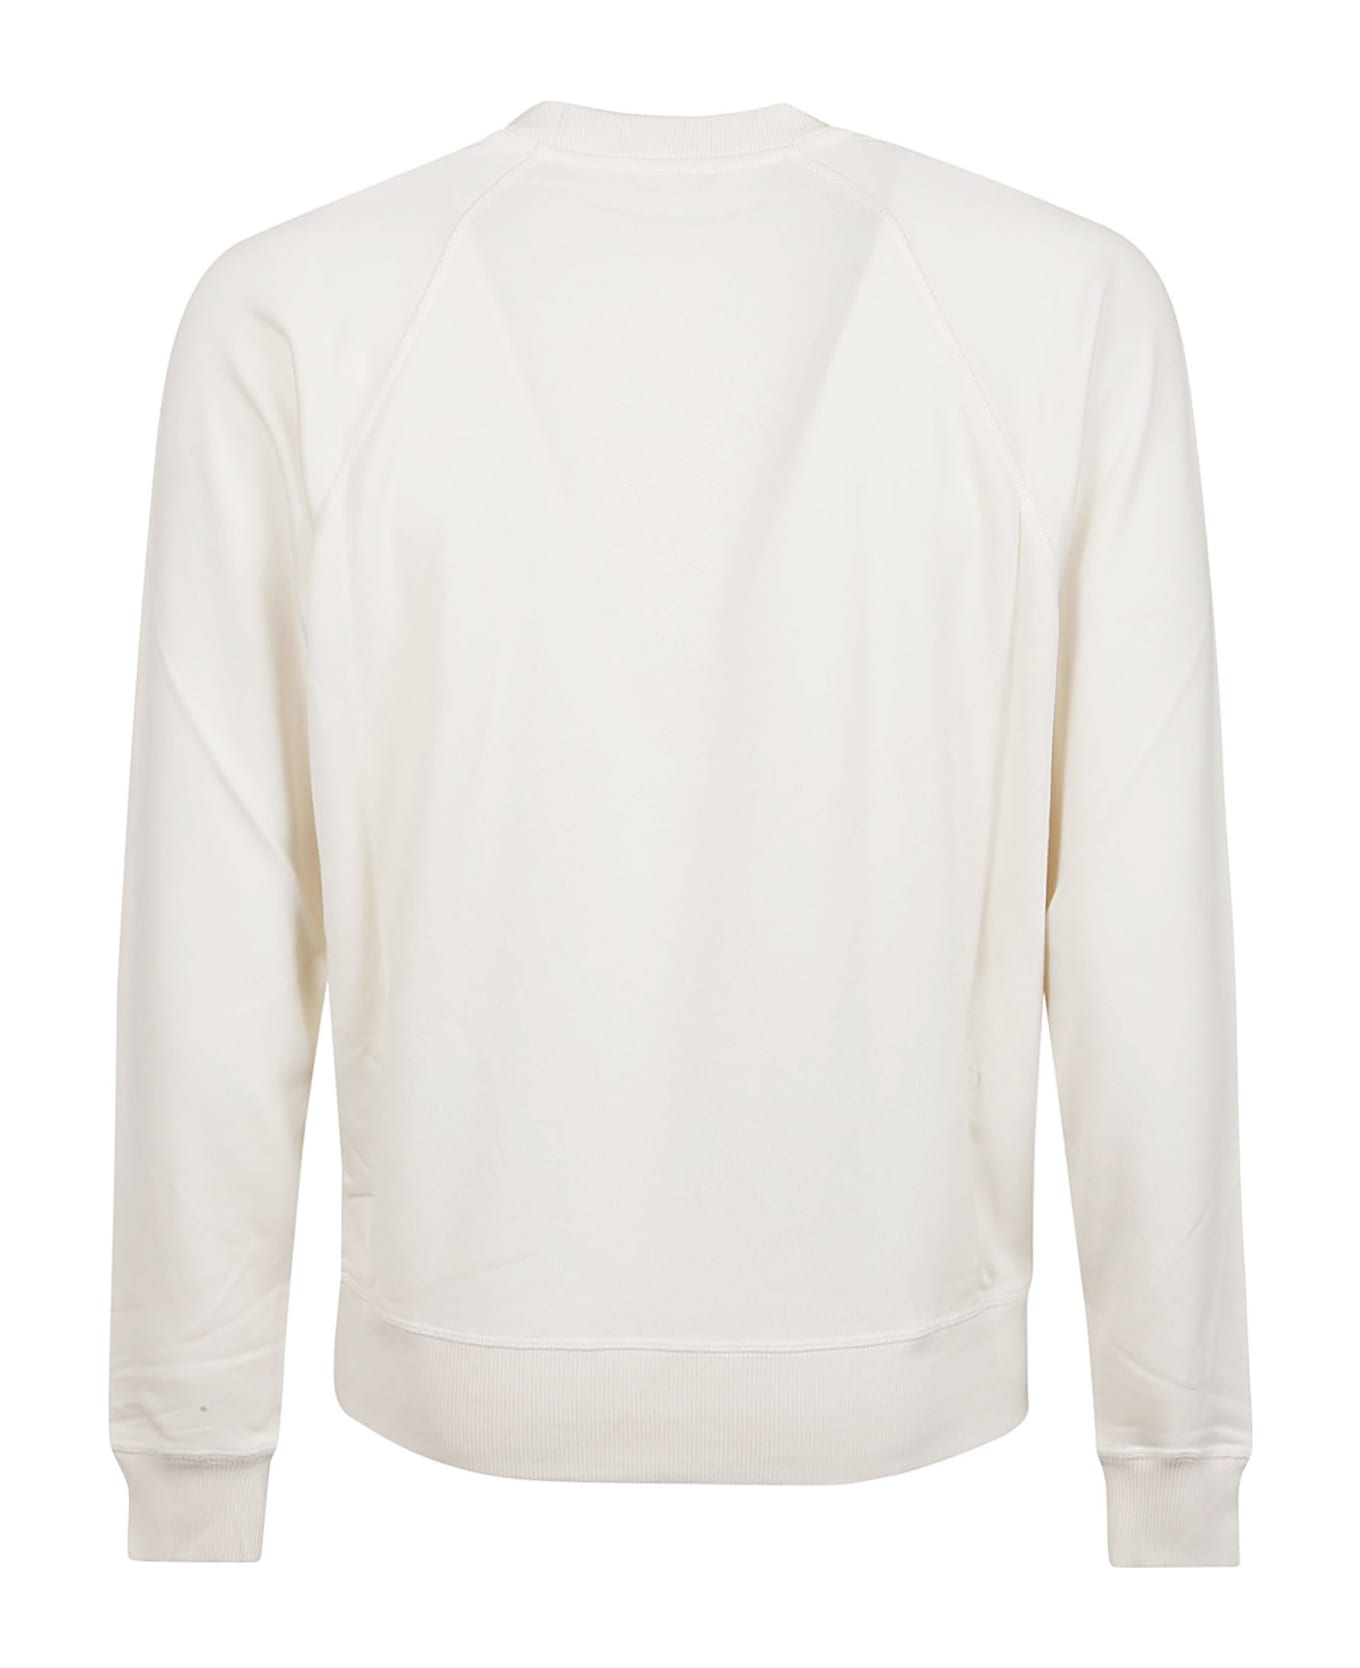 Tom Ford Long Sleeve Sweater - Ivory